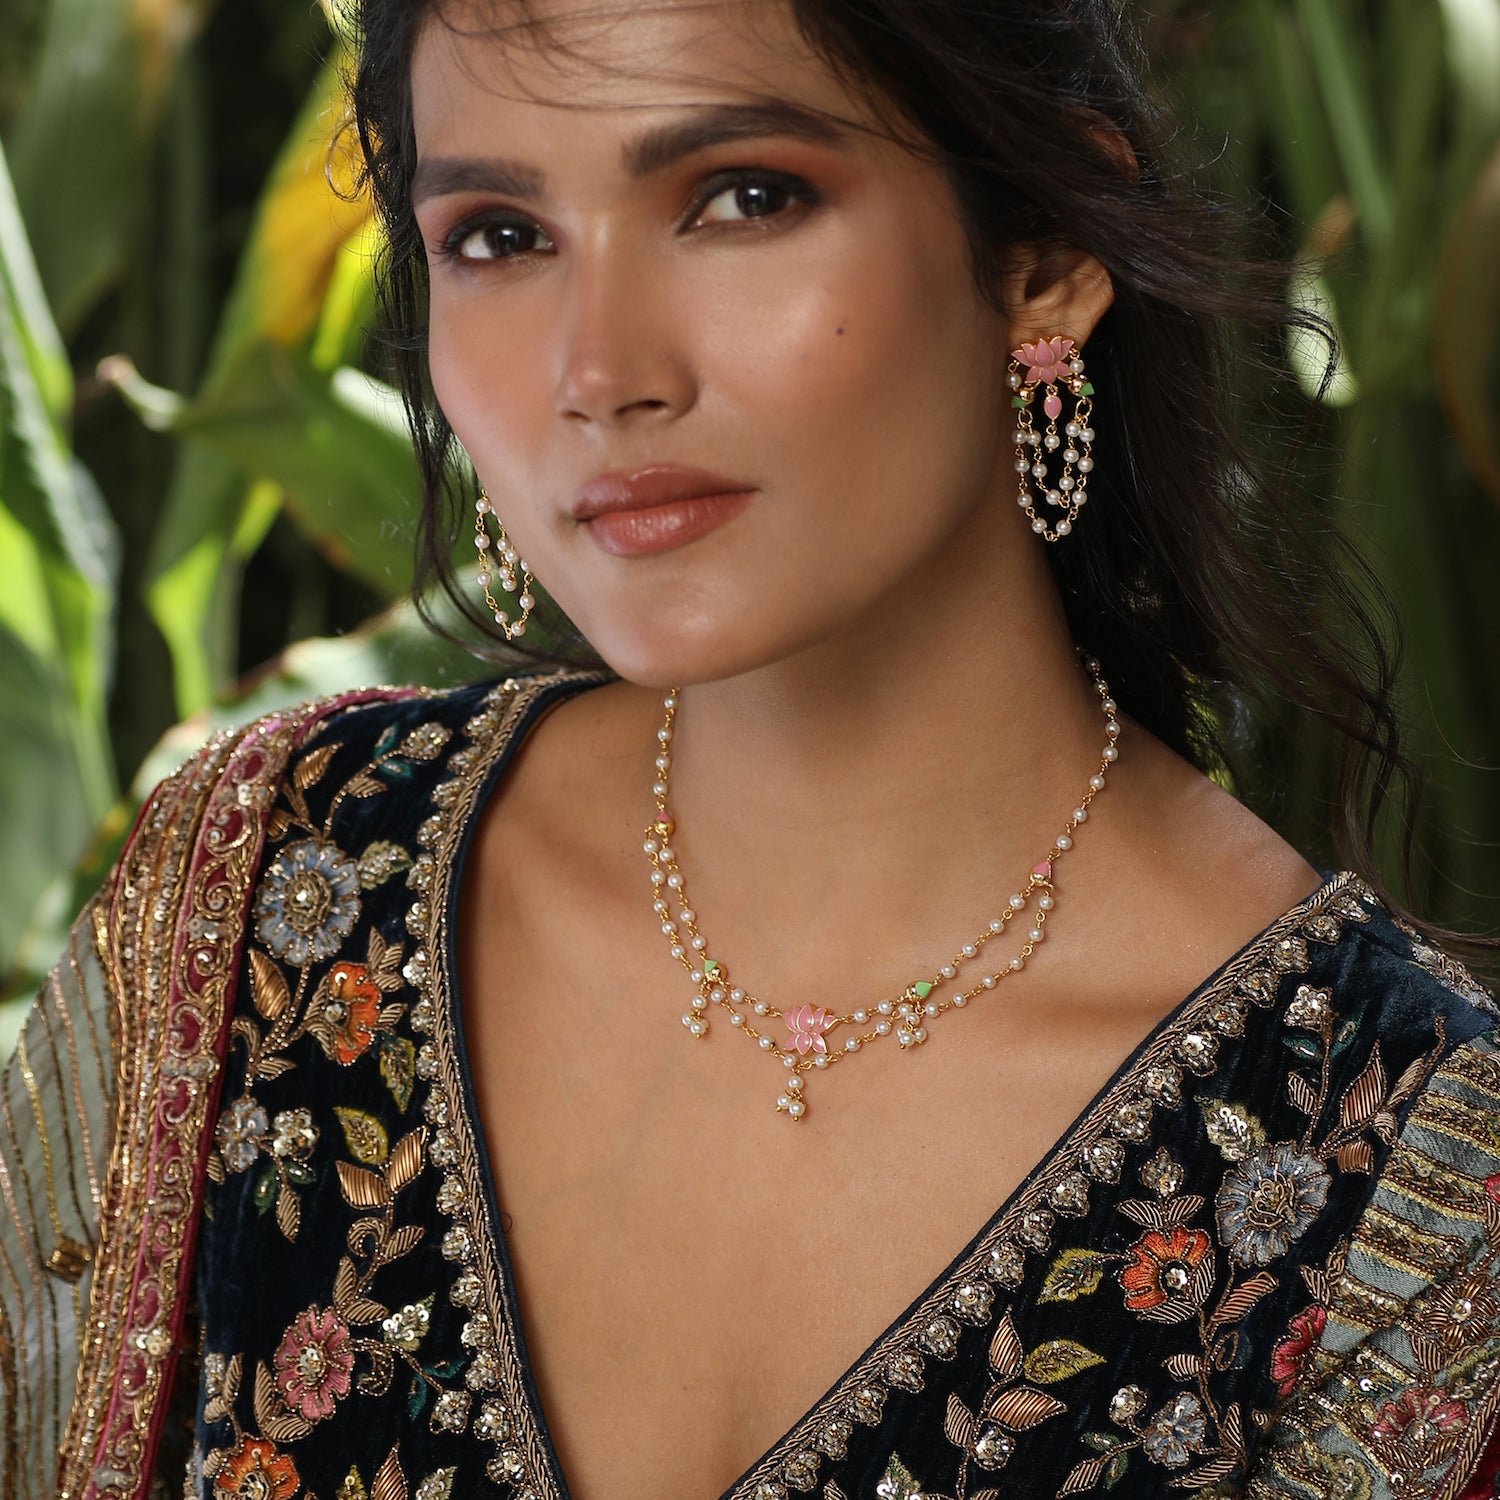 A picture of an Indian artificial layered necklace set with lotus pendant and a gold-toned chain. The earrings are stud style with matching white stones.